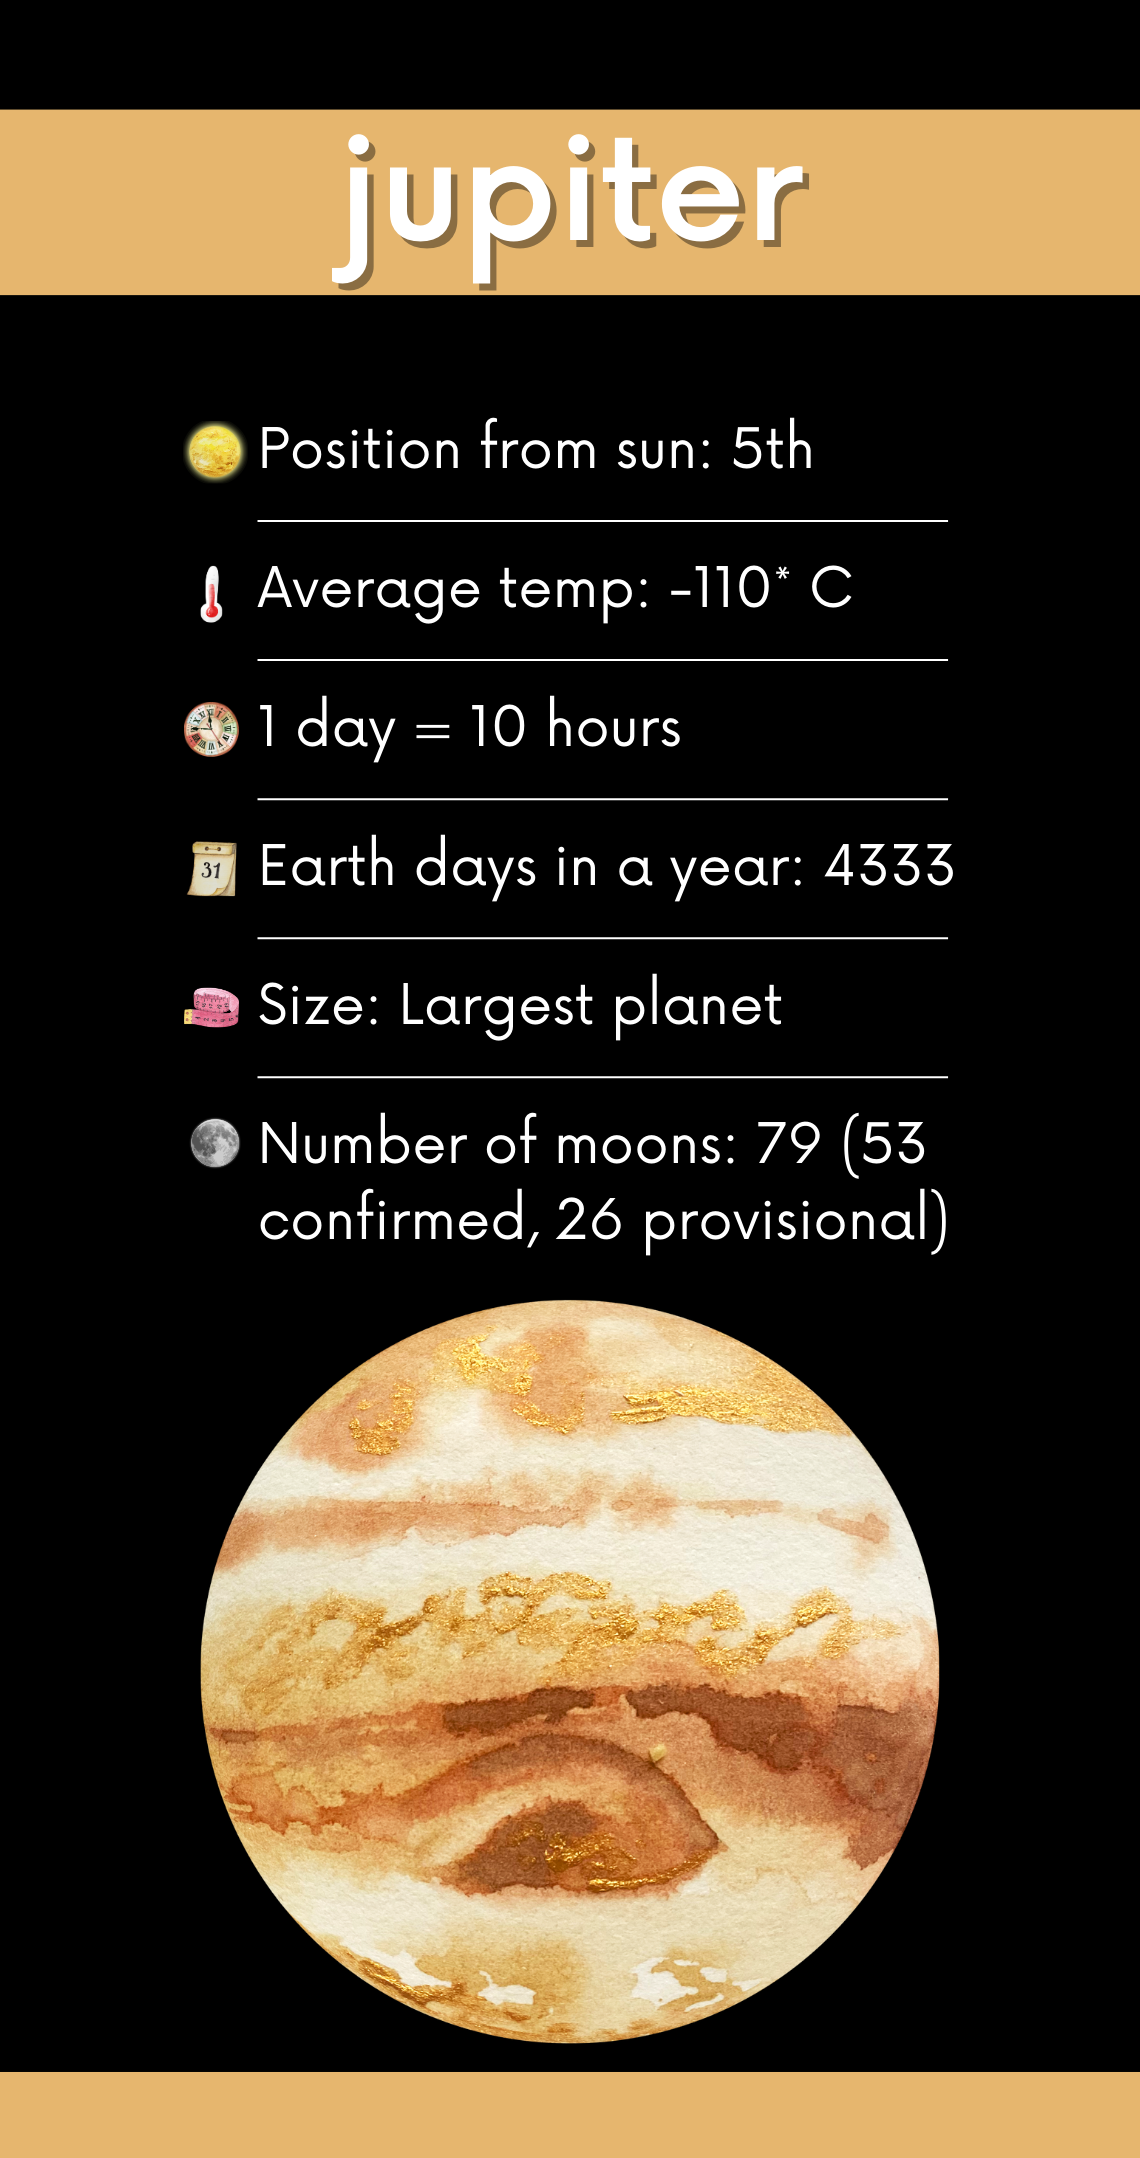 Details about Jupiter, Position from the sun, 5th
Average Temp -110C
1day = 10 hours Earth days in a year 4333 Largest planet in our solar system, 79 moons!